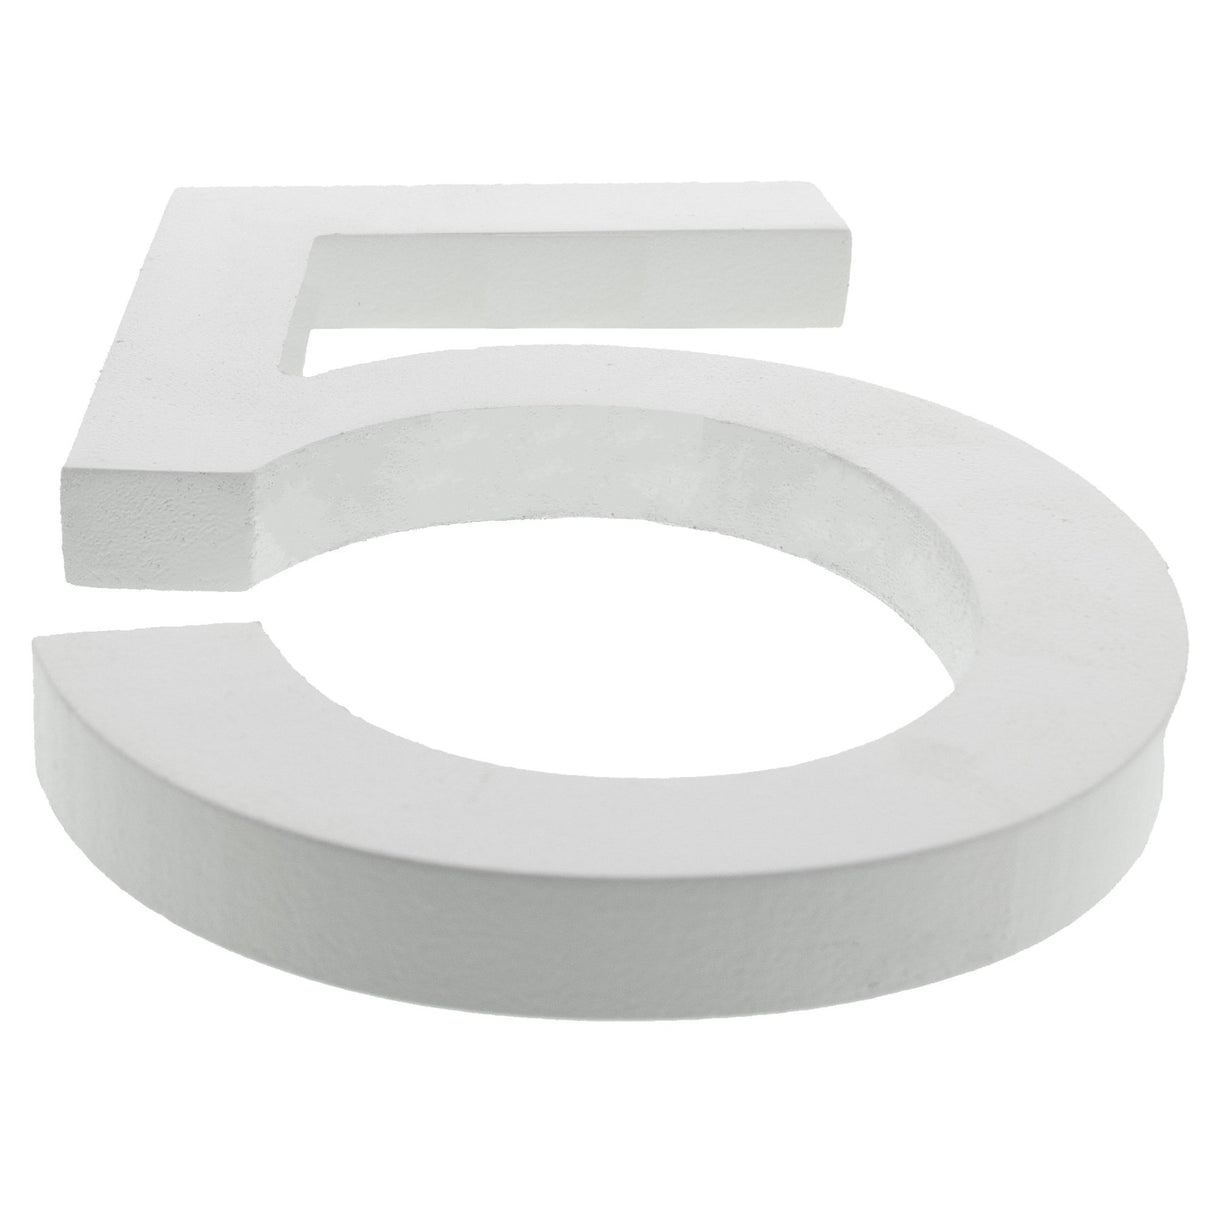 Arial Font White Painted MDF Wood Number 5 (Five) 6 Inches in White color,  shape